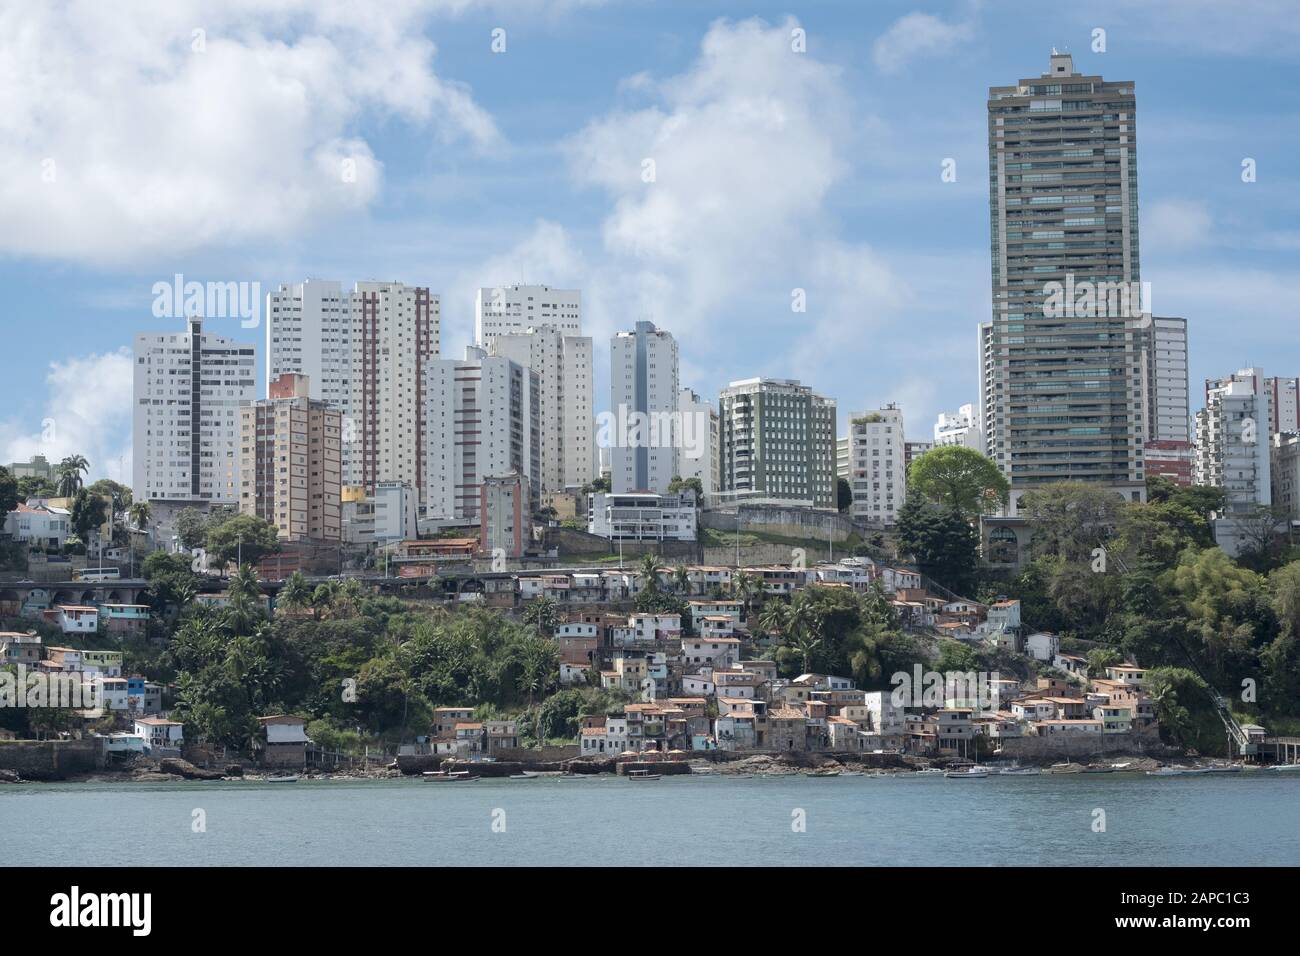 Brazil, Bahia, Salvador. Wealthy apartment blocks and favela slums in the Campo Grande region of the city Stock Photo